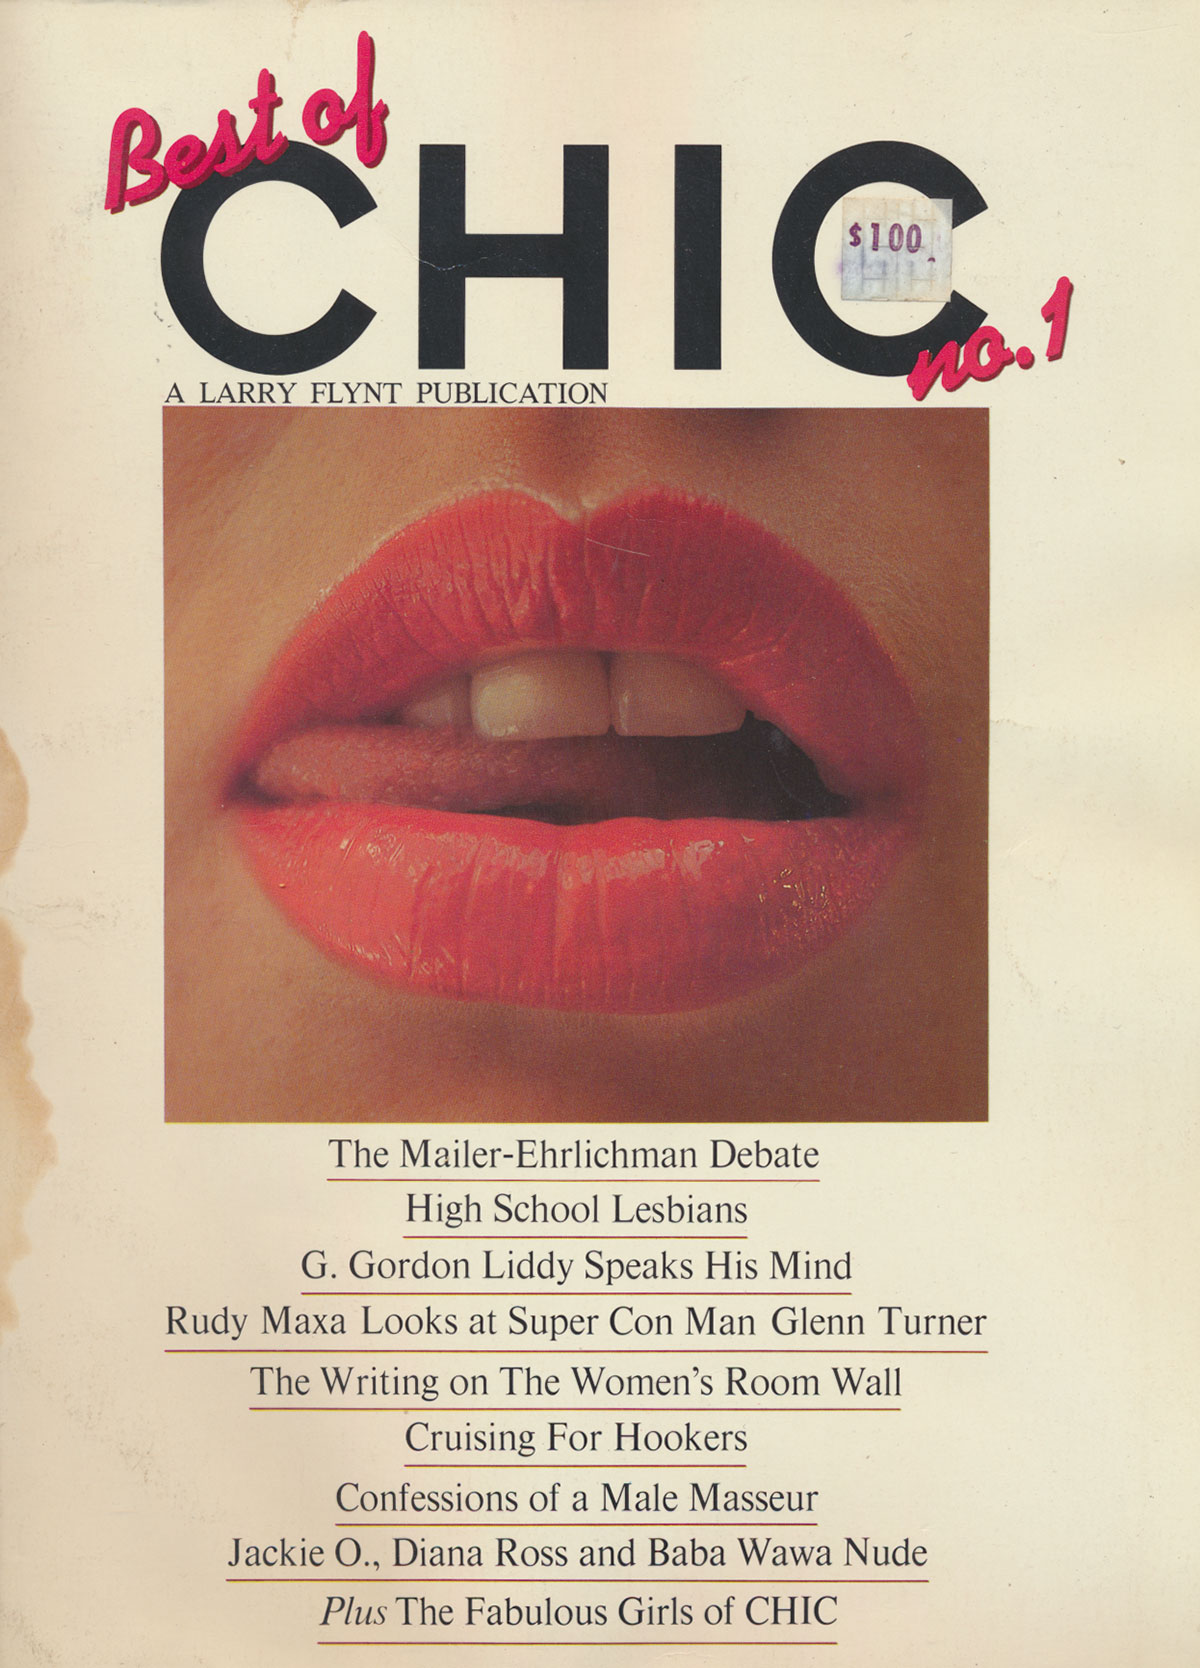 Best of Chic # 1 magazine back issue Best of Chic magizine back copy Best of Chic # 1 Adult Pornographic Magazine Back Issue Published by LFP, Larry Flynt Publications. Covergirl Lips.